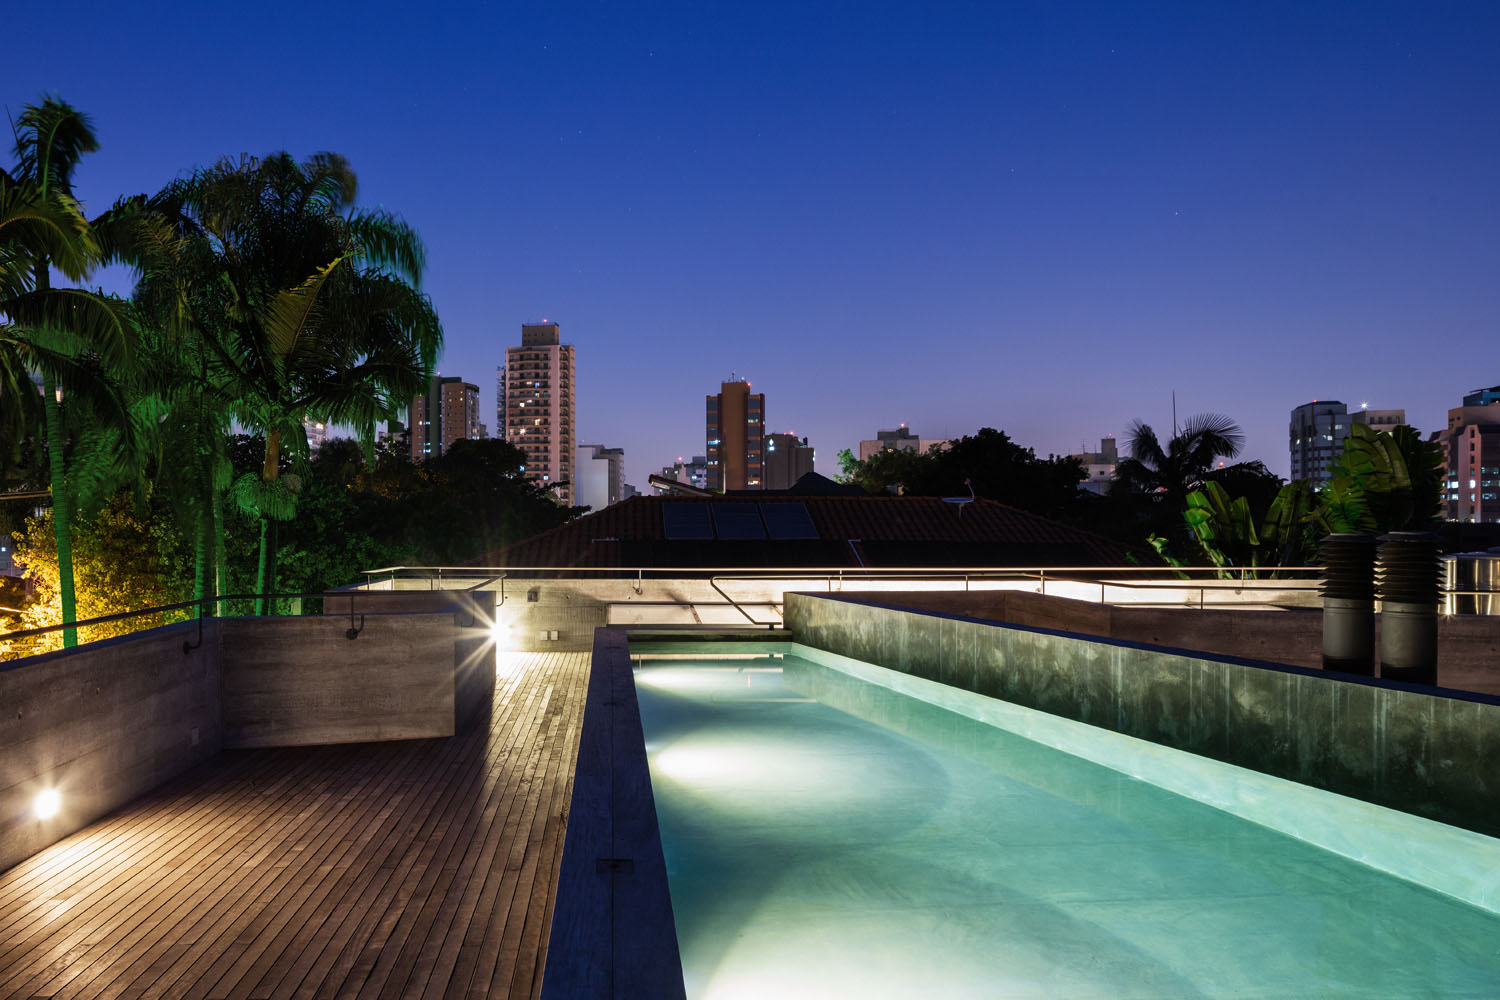 The pool and rooftop terrace are the perfect place to enjoy the city views